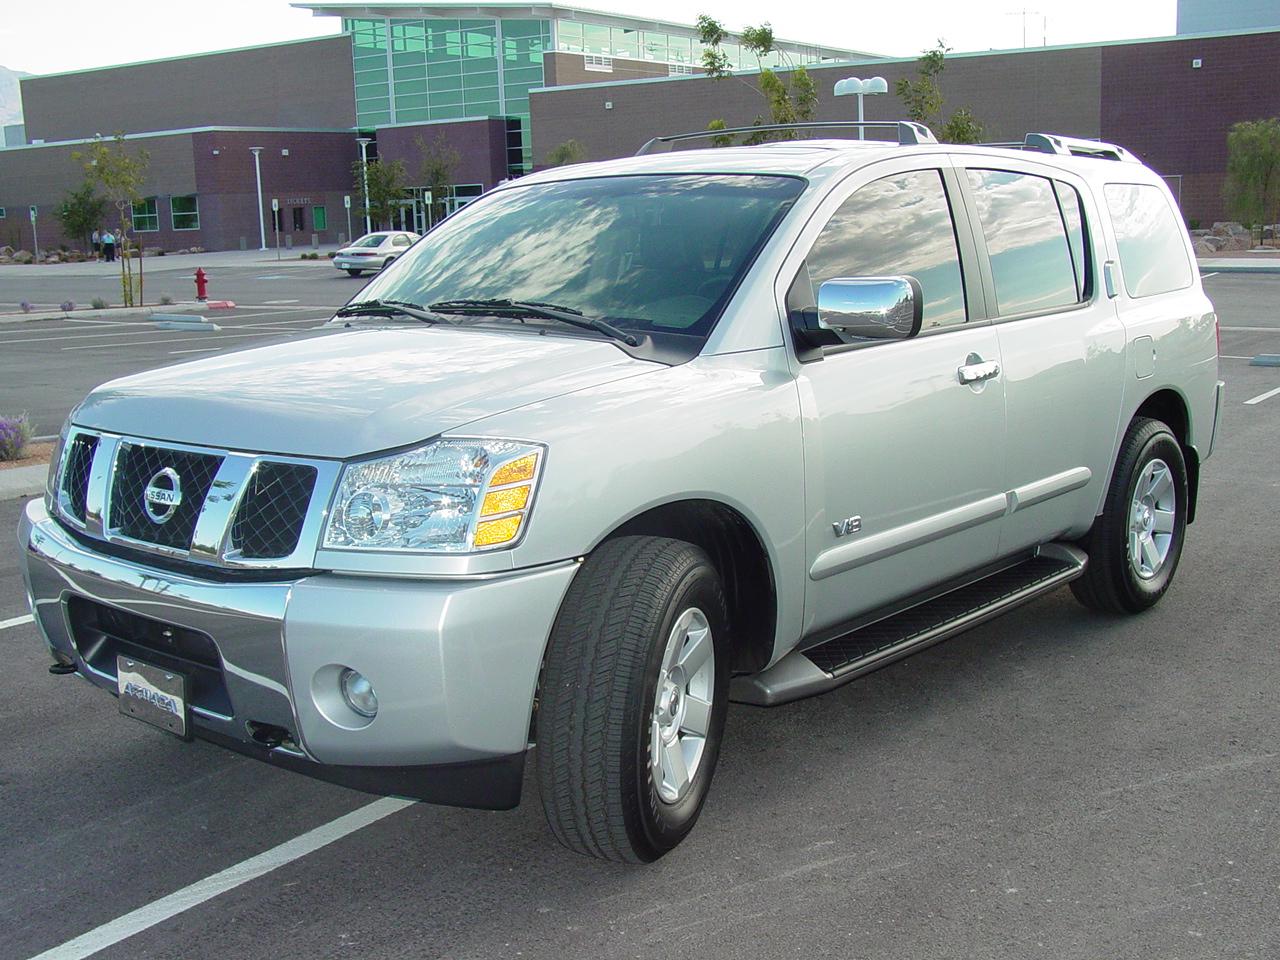 Nissan armada picture gallery #9